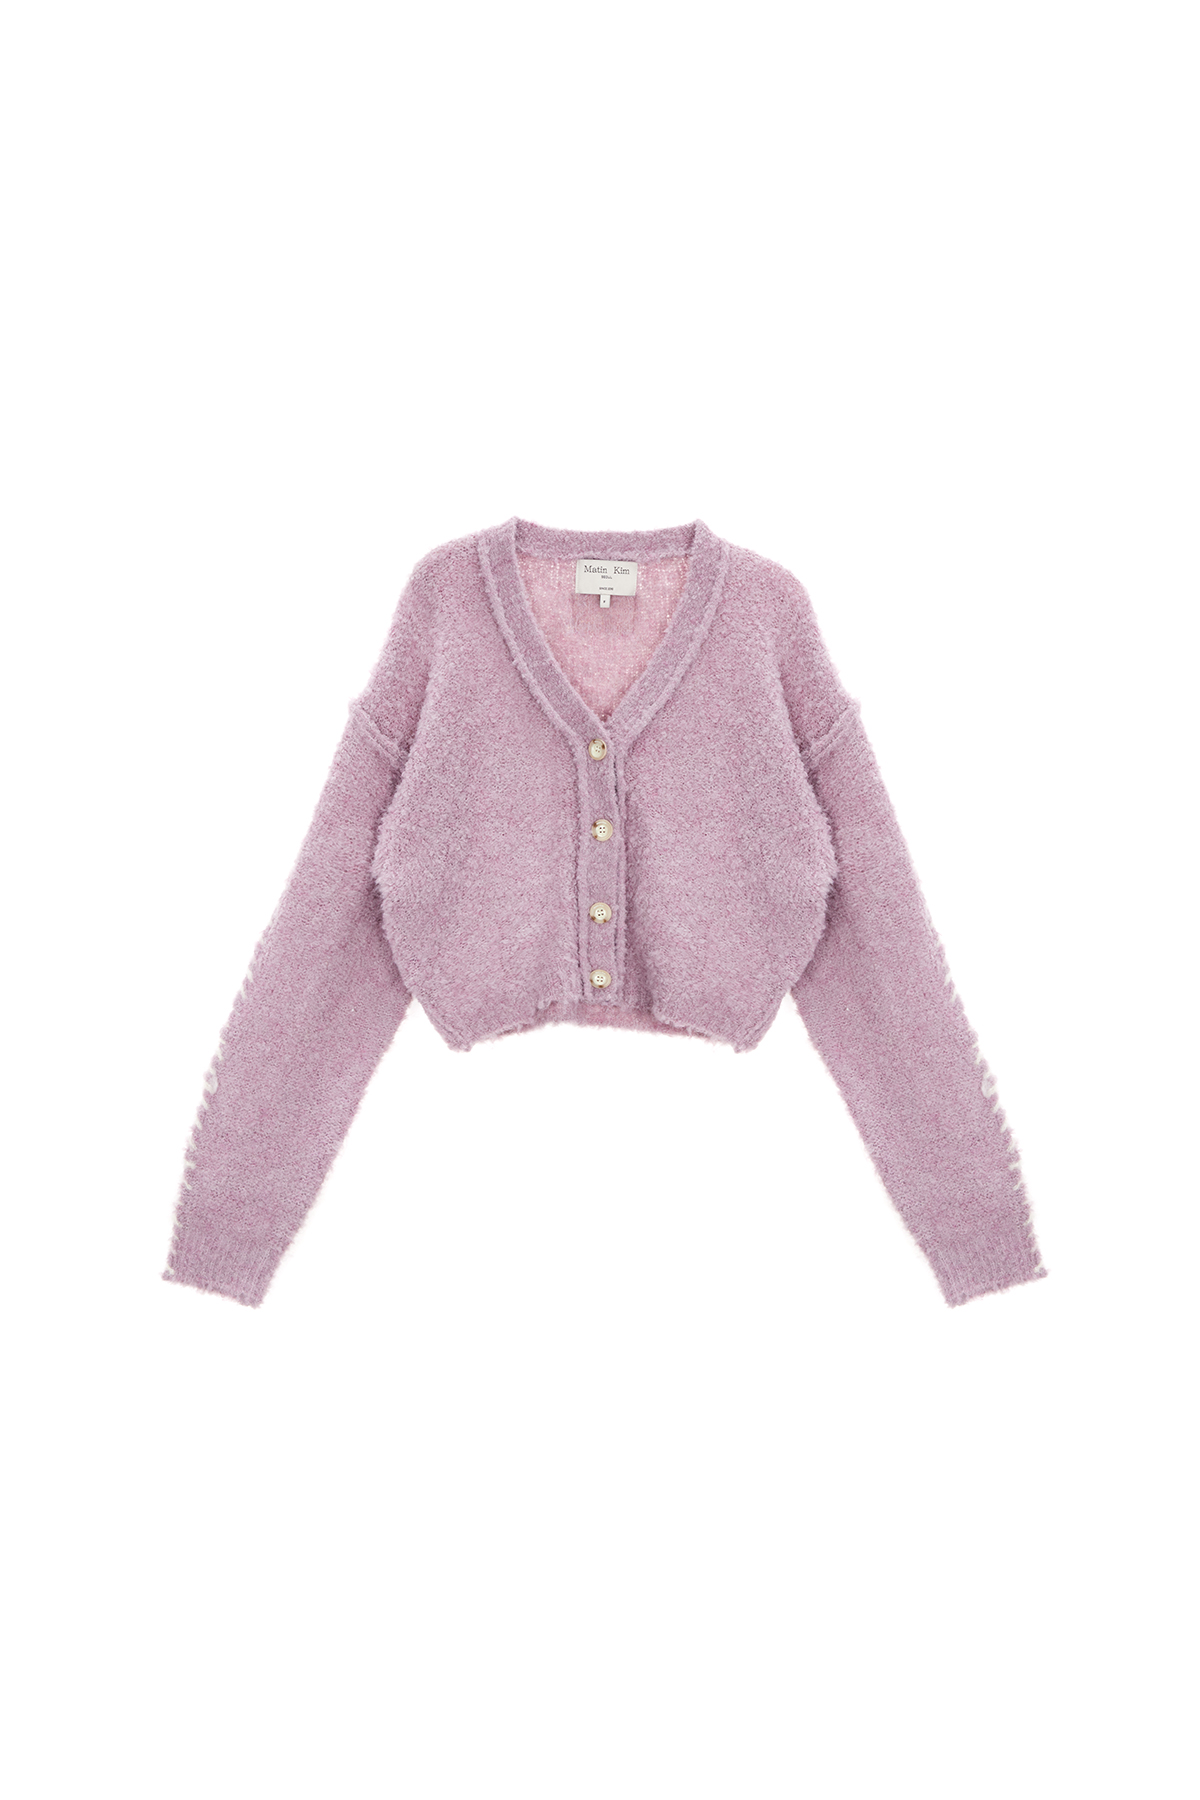 [EXCLUSIVE] SLEEVE STITCH CROP BOUCLE CARDIGAN IN LILAC